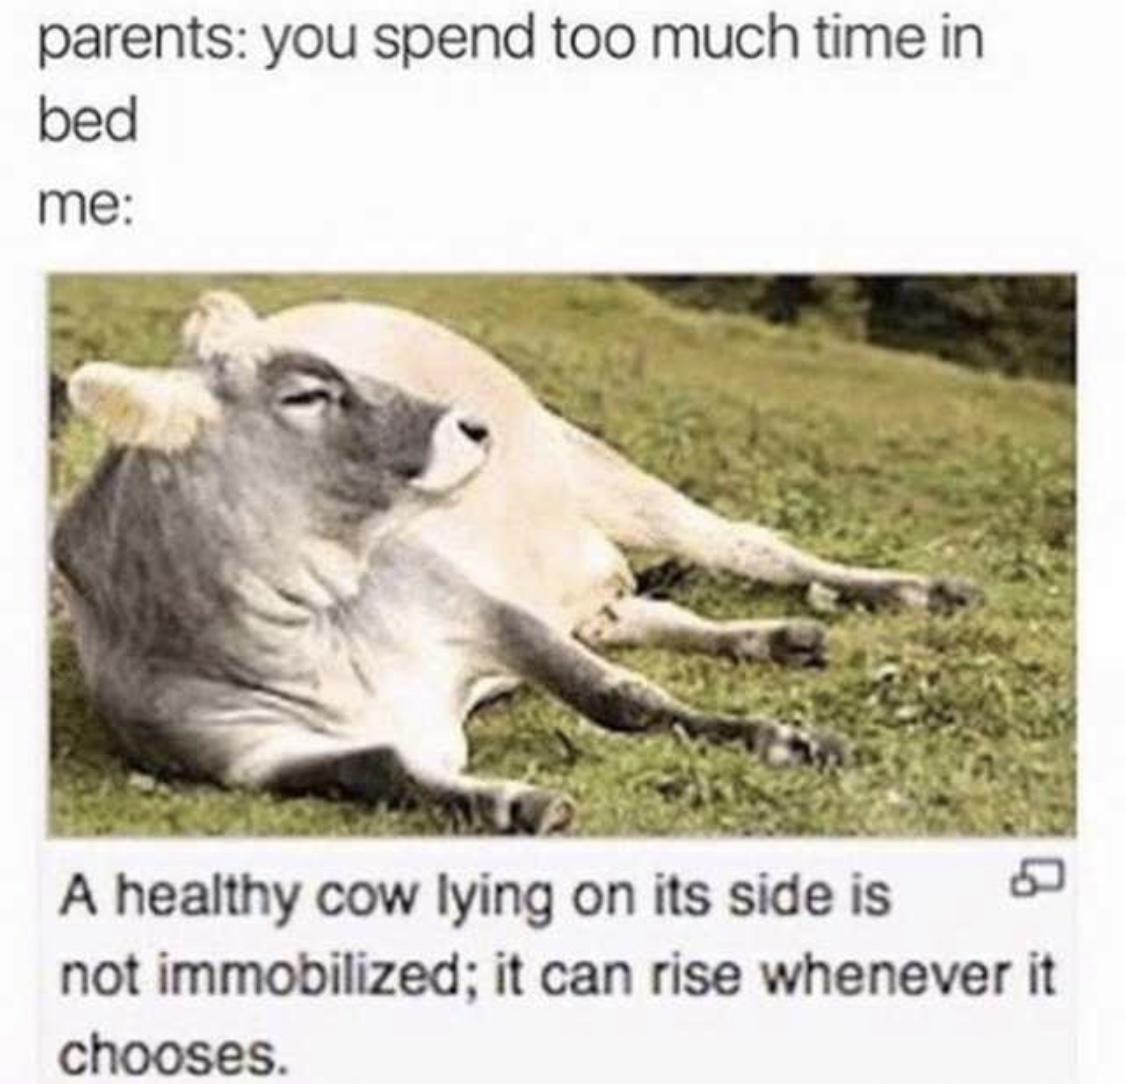 healthy cow lying on its side - parents you spend too much time in bed me A healthy cow lying on its side is not immobilized; it can rise whenever it chooses.